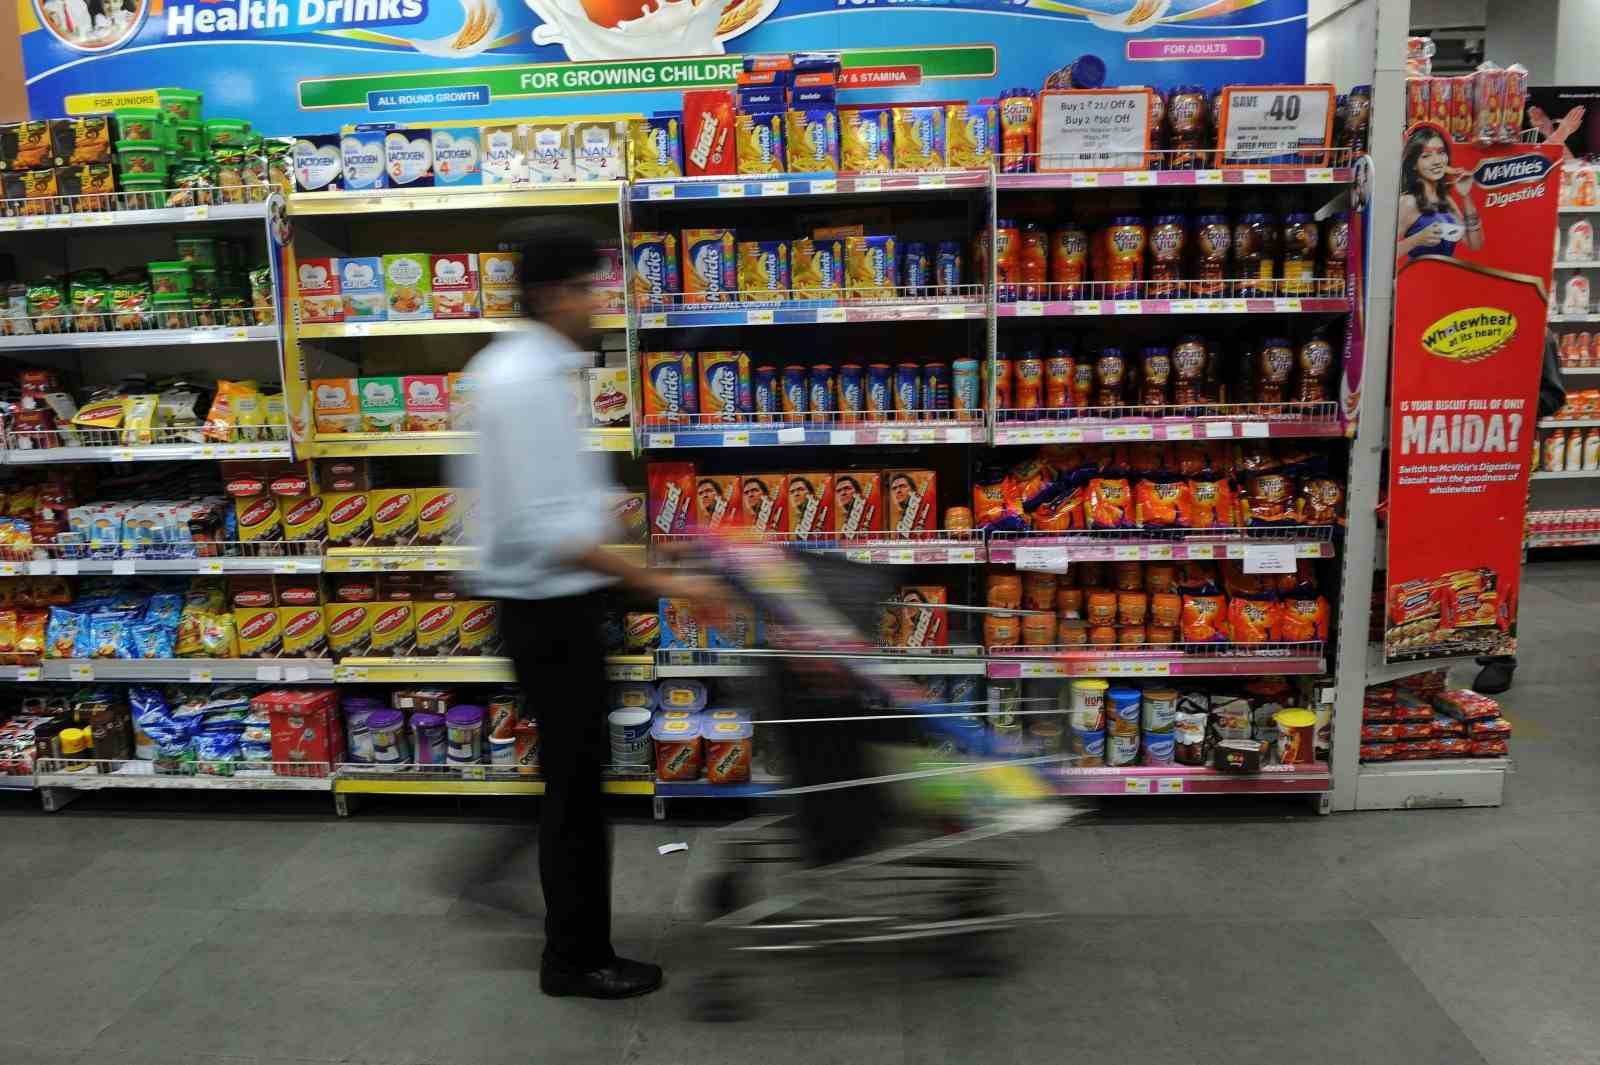 An Indian shopper browses at a supermarket in Mumbai in front of an aisle full of chocolate malt drinks such as Horlicks, Bournvita, Boost, etc. (INDRANIL MUKHERJEE/AFP via Getty Images)